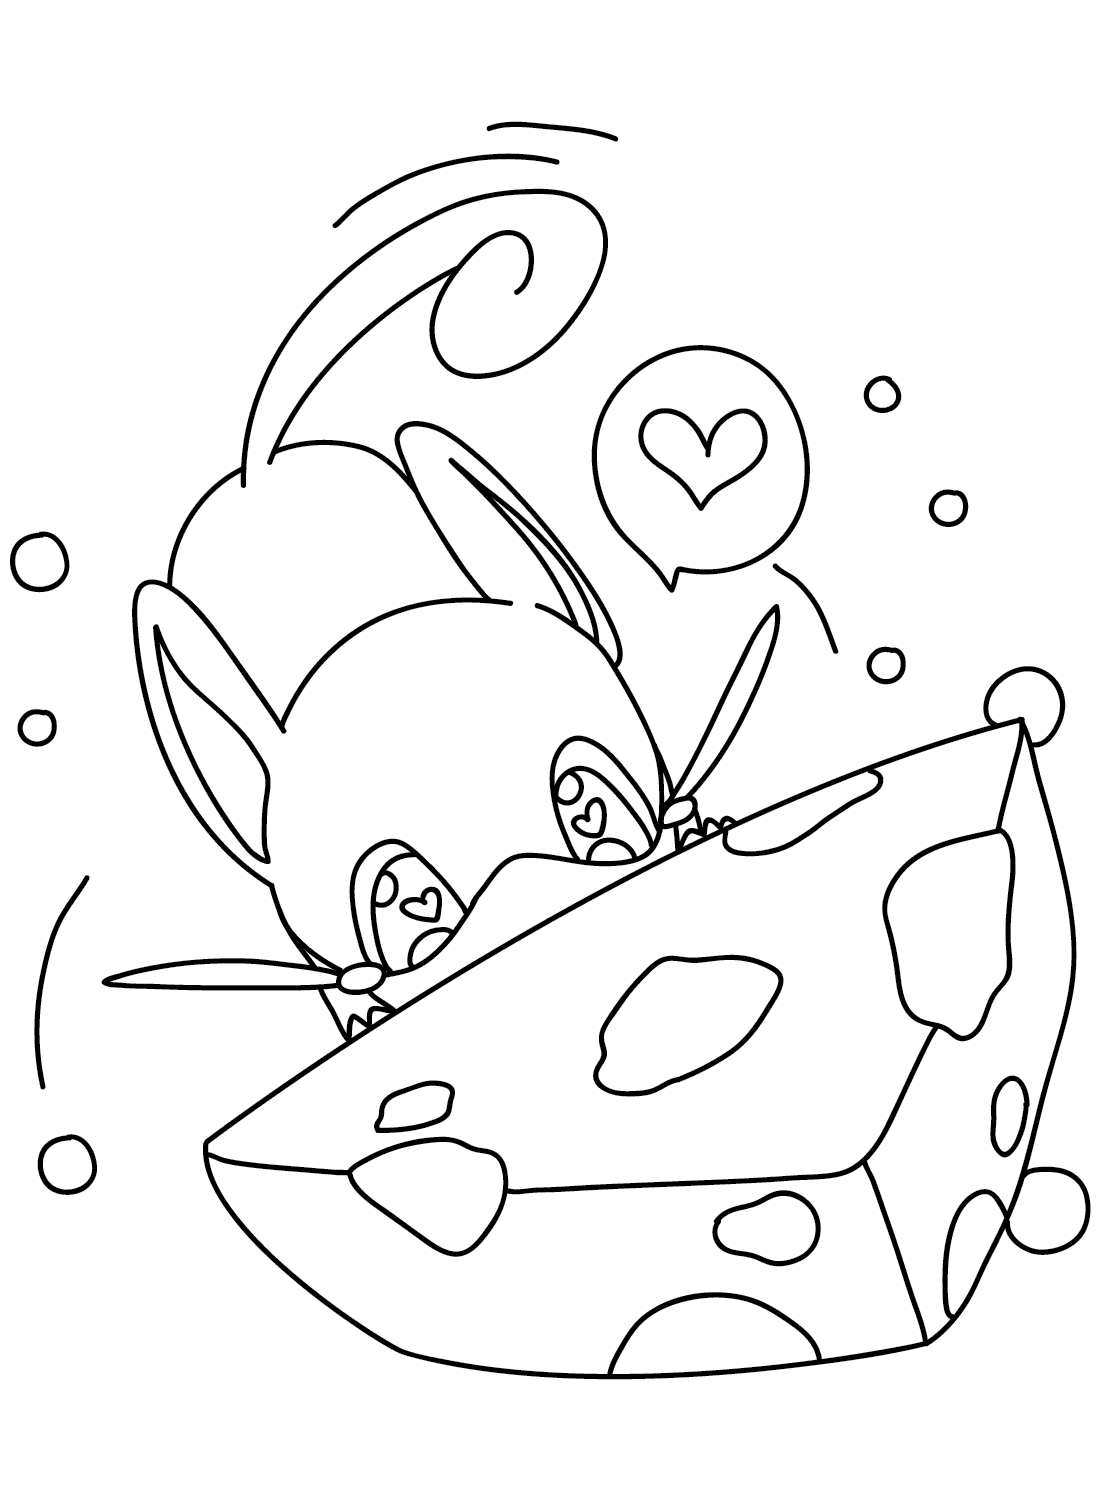 Character Koratta Coloring Page Coloring Page